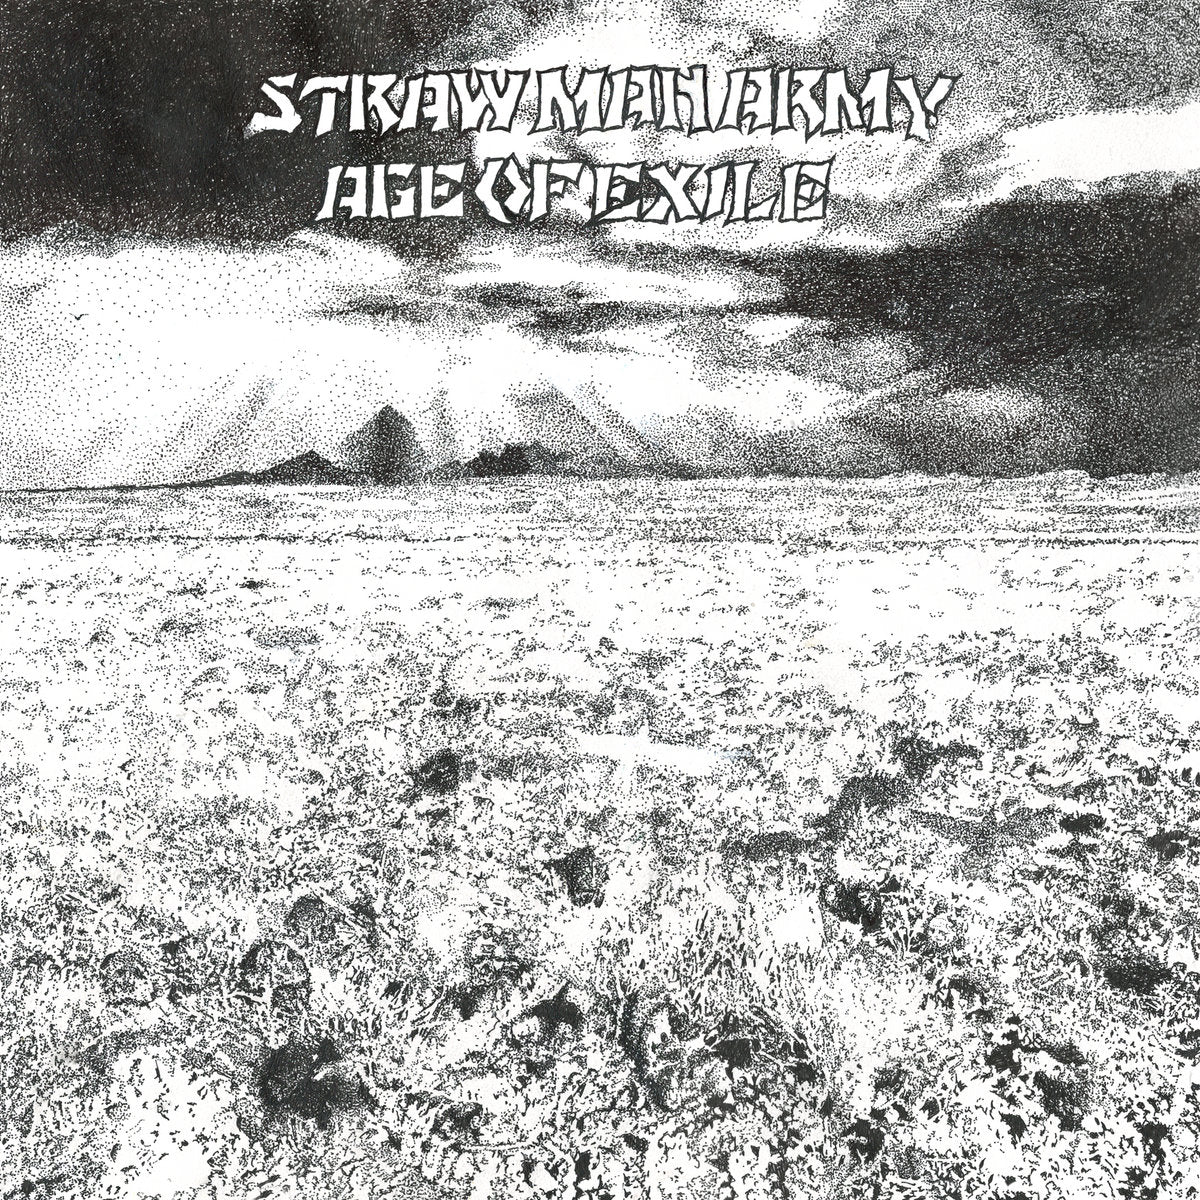 Straw Man Army "Age of Exile" LP